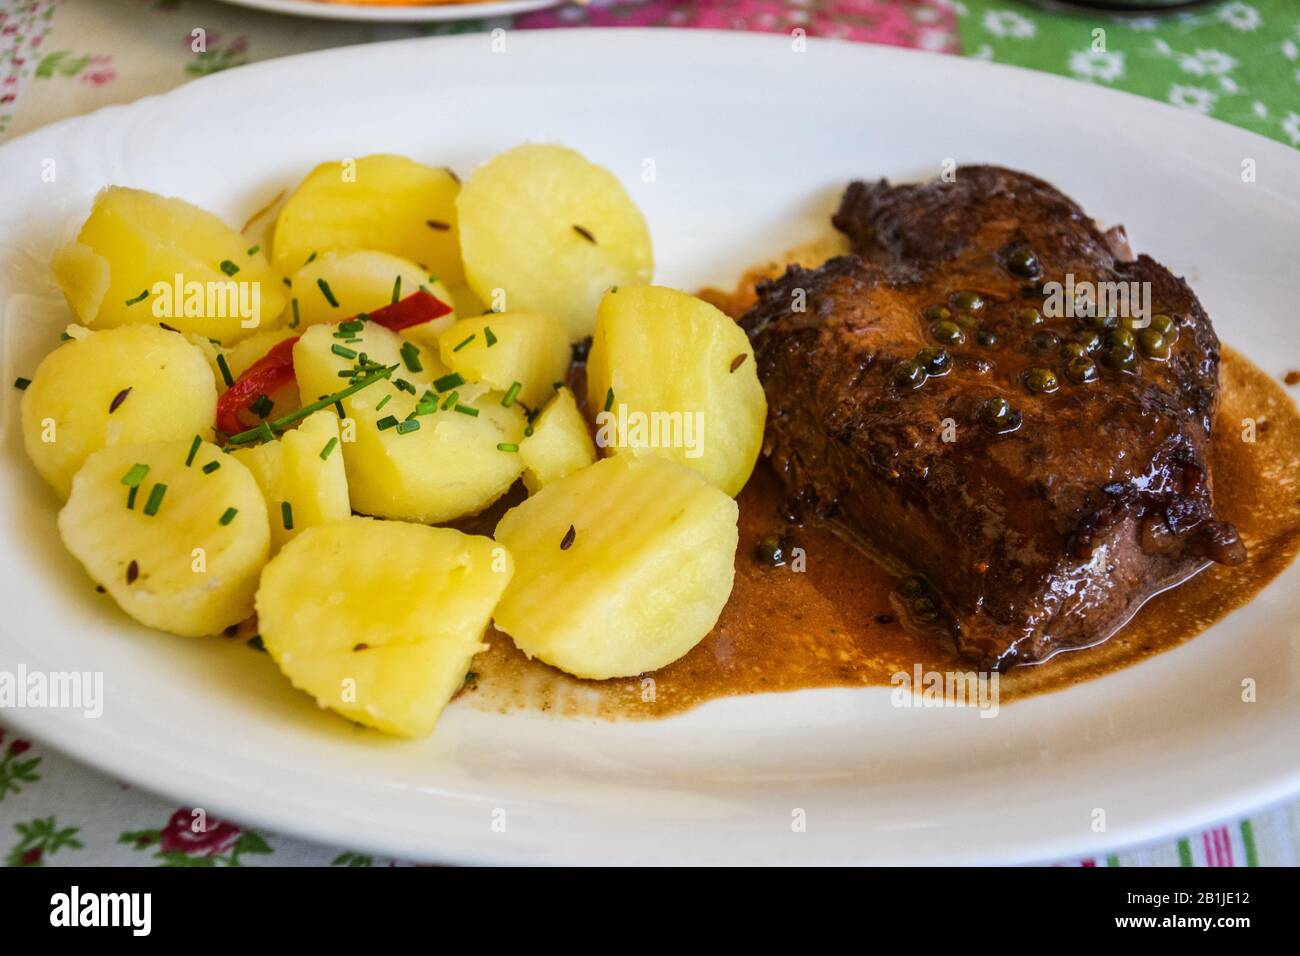 Beef steak with boiled potatoes in Czech Republic. Stock Photo